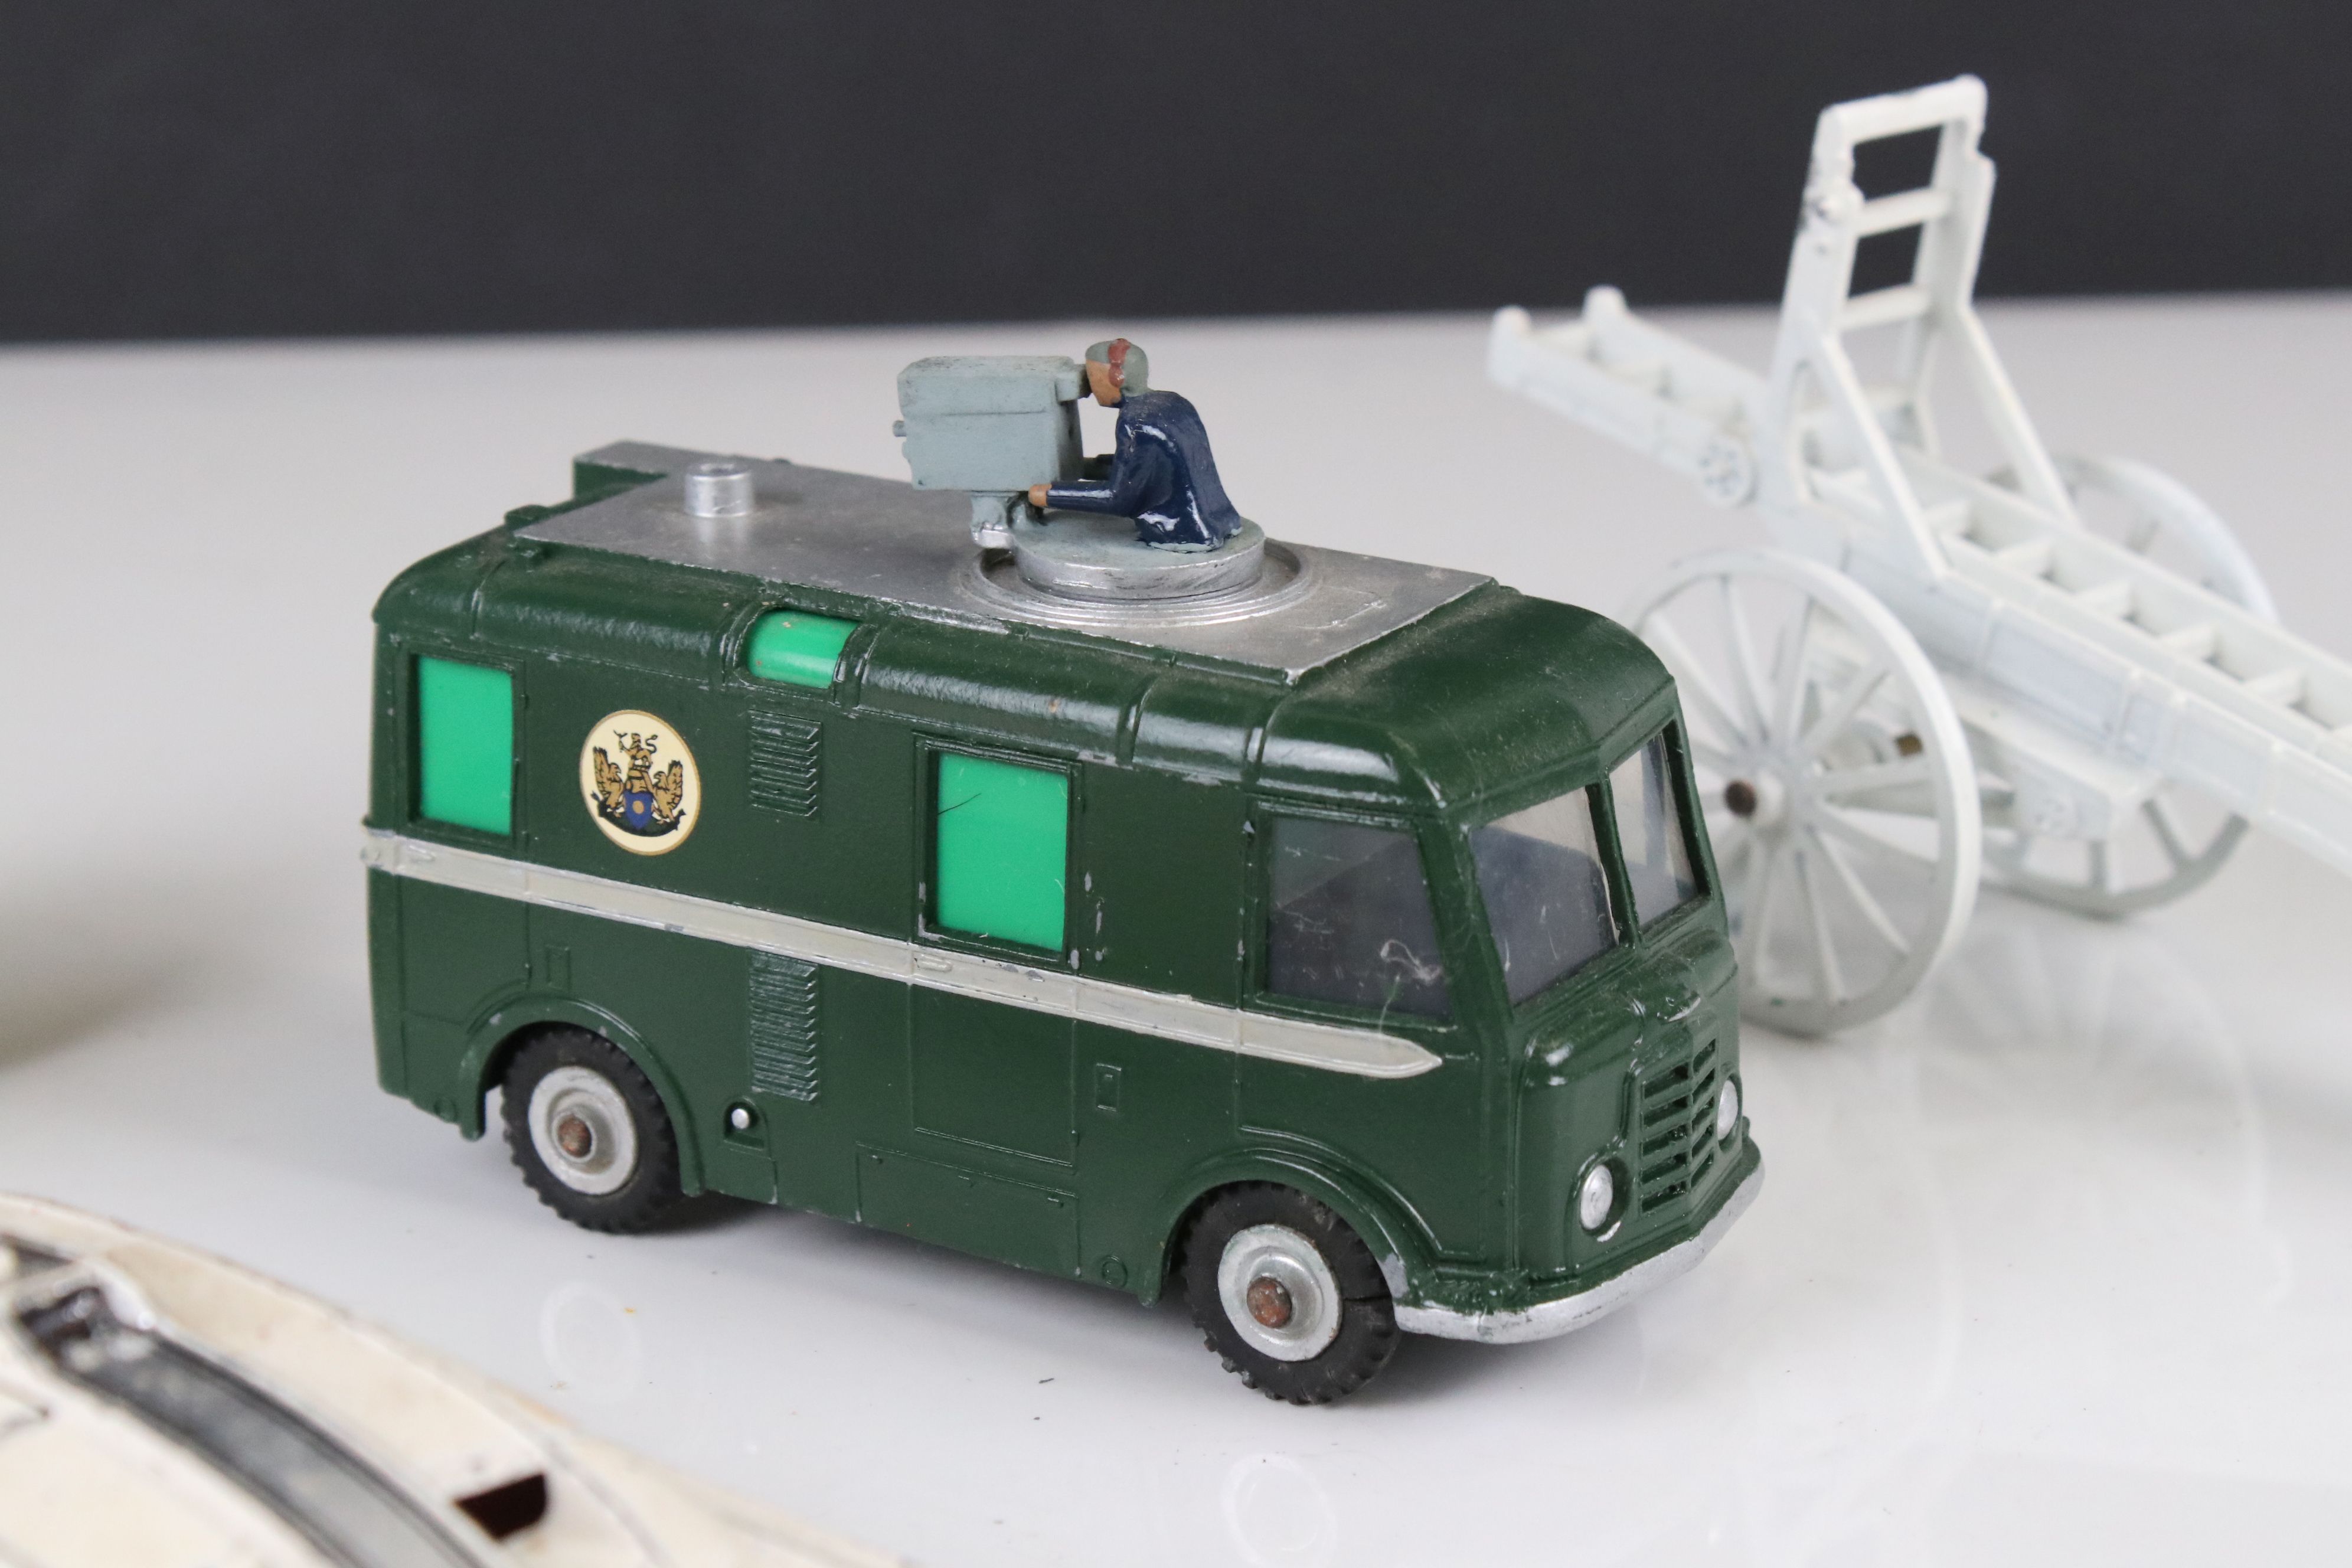 15 play worn mid 20th diecast models to include TV Mobile Control Room, 967 BBC TV Mobile Control - Image 15 of 15